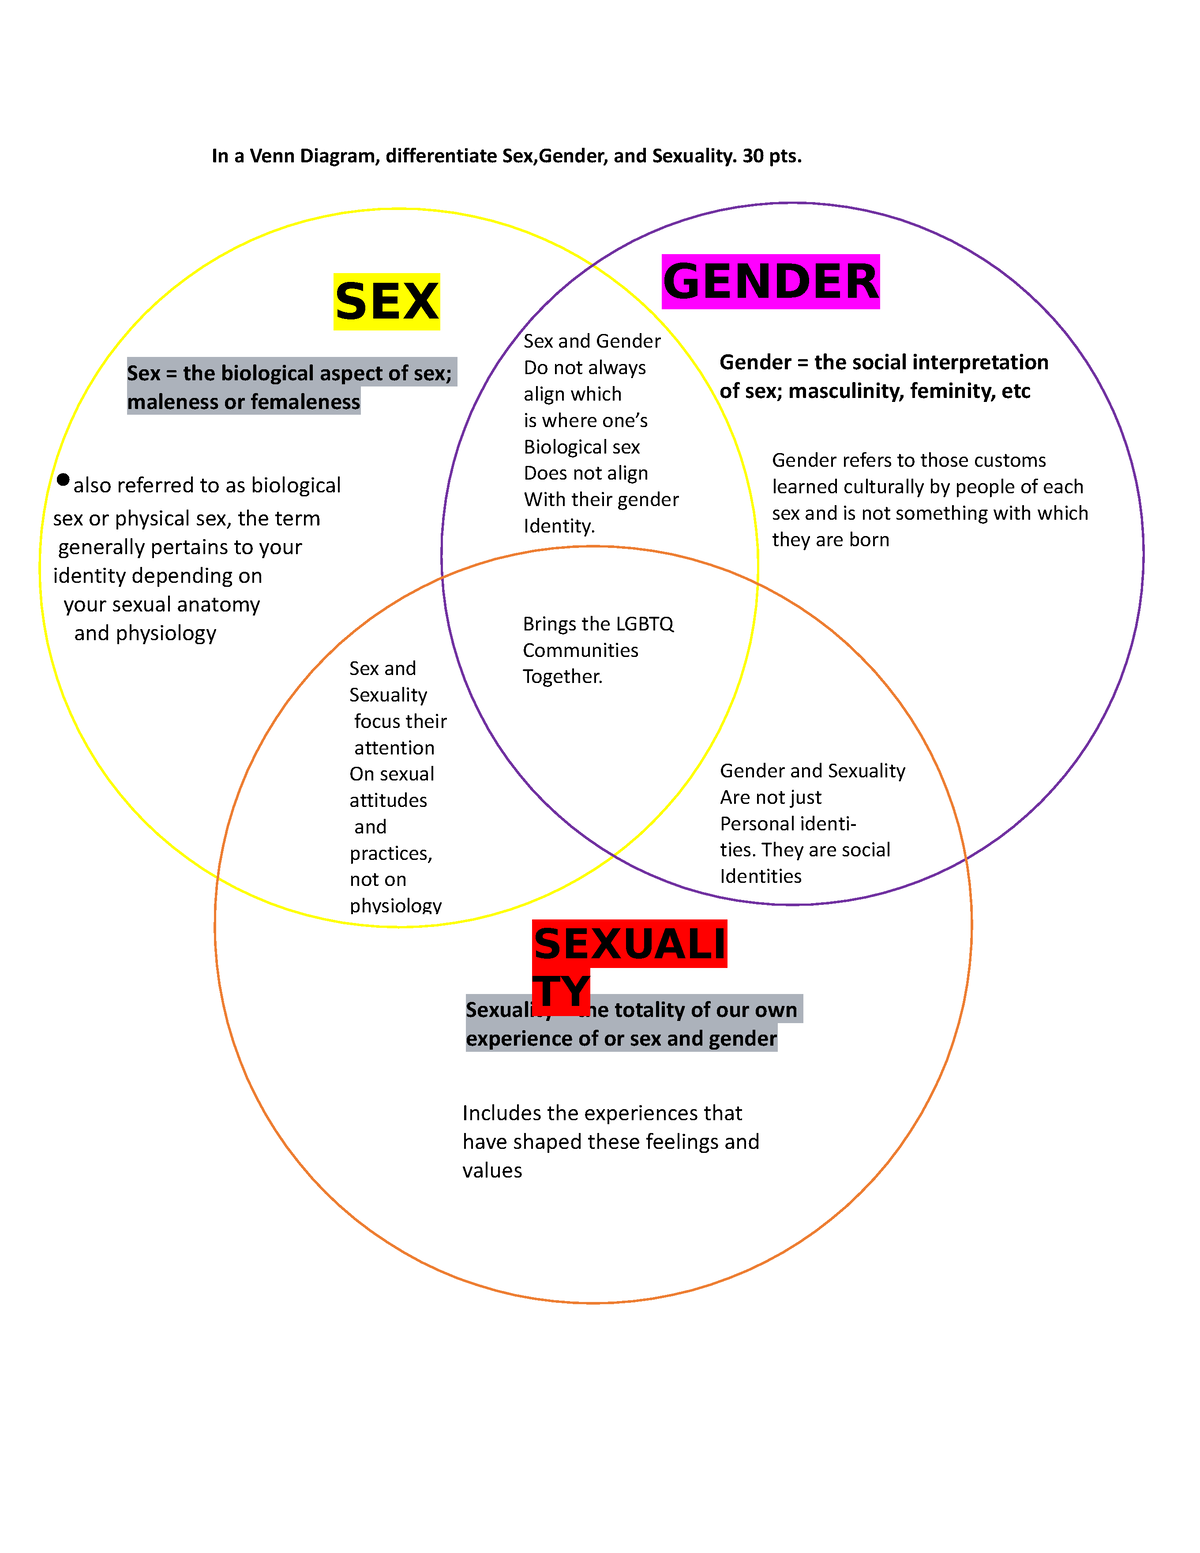 Document Notes In A Venn Diagram Differentiate Sexgender And Sexuality 30 Pts Sex 0286